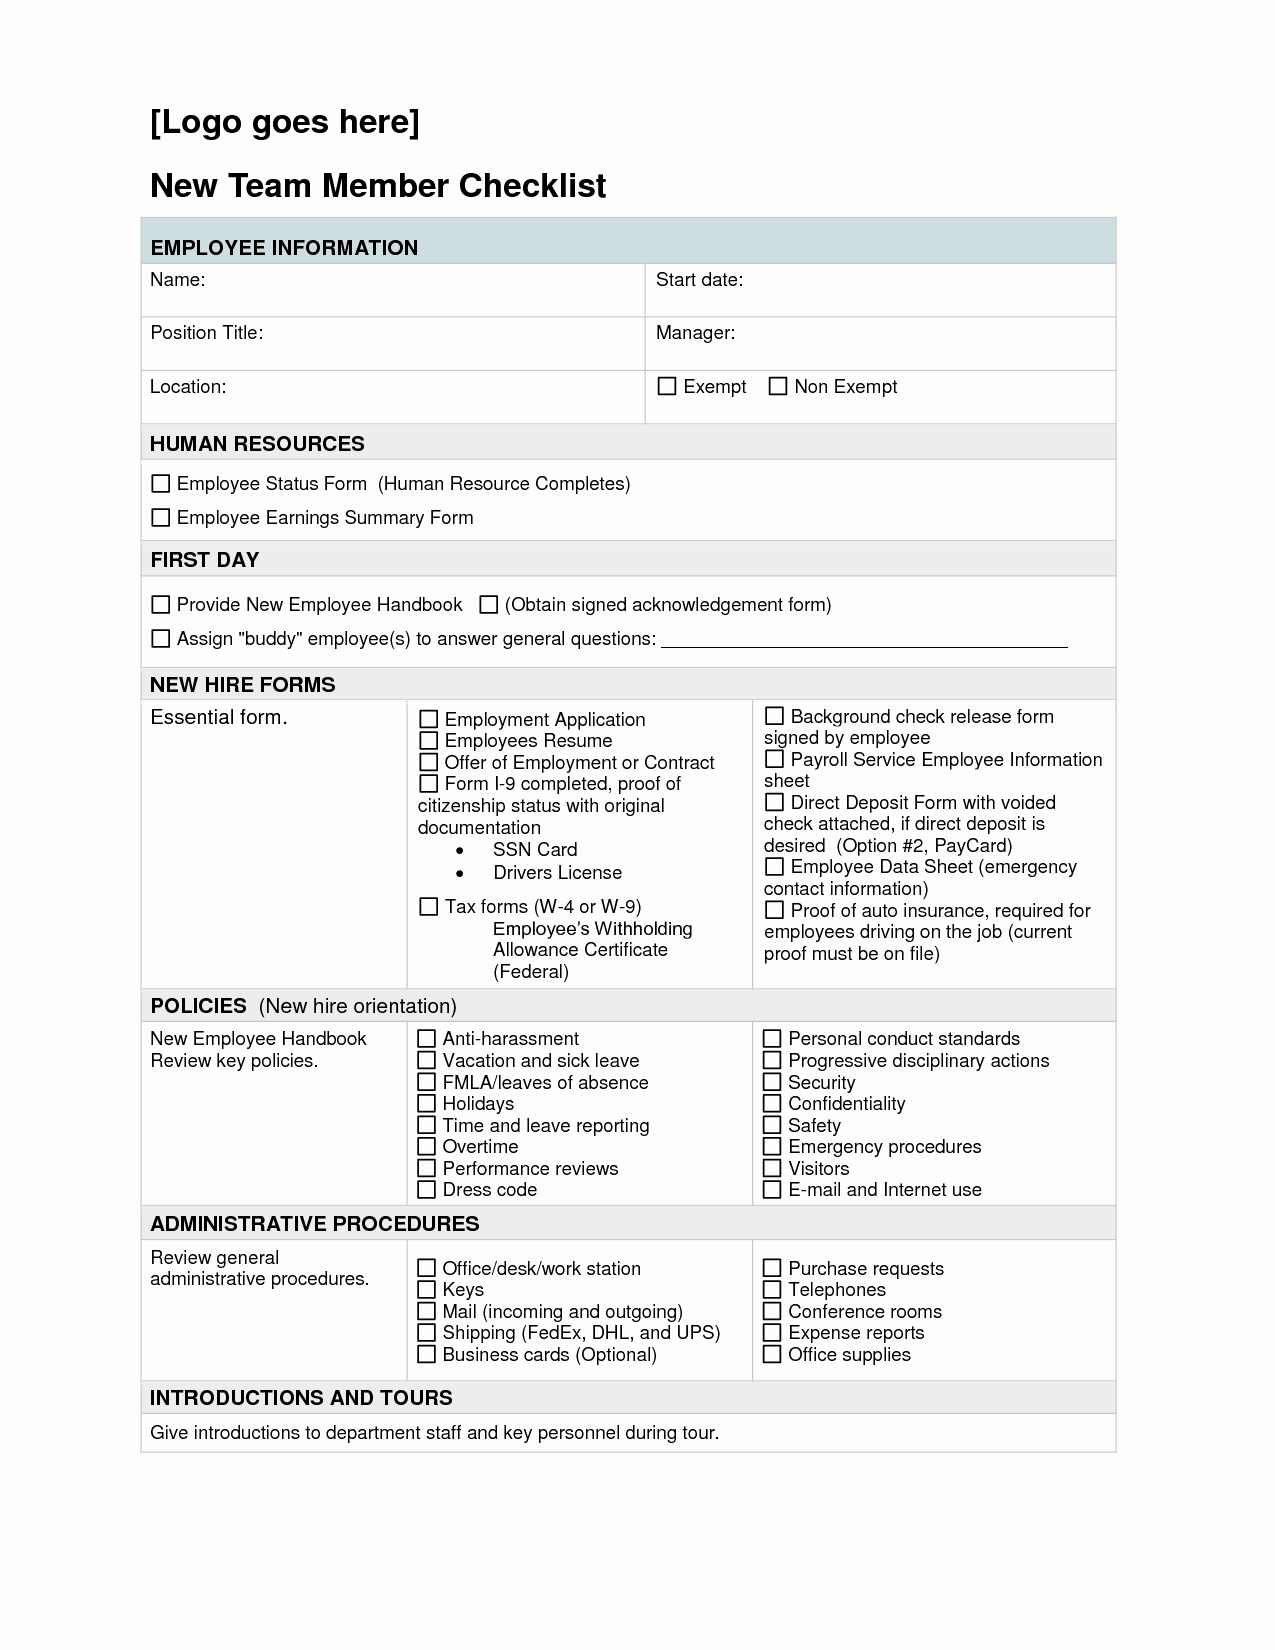 New Hire Checklist Full Version Employee forms